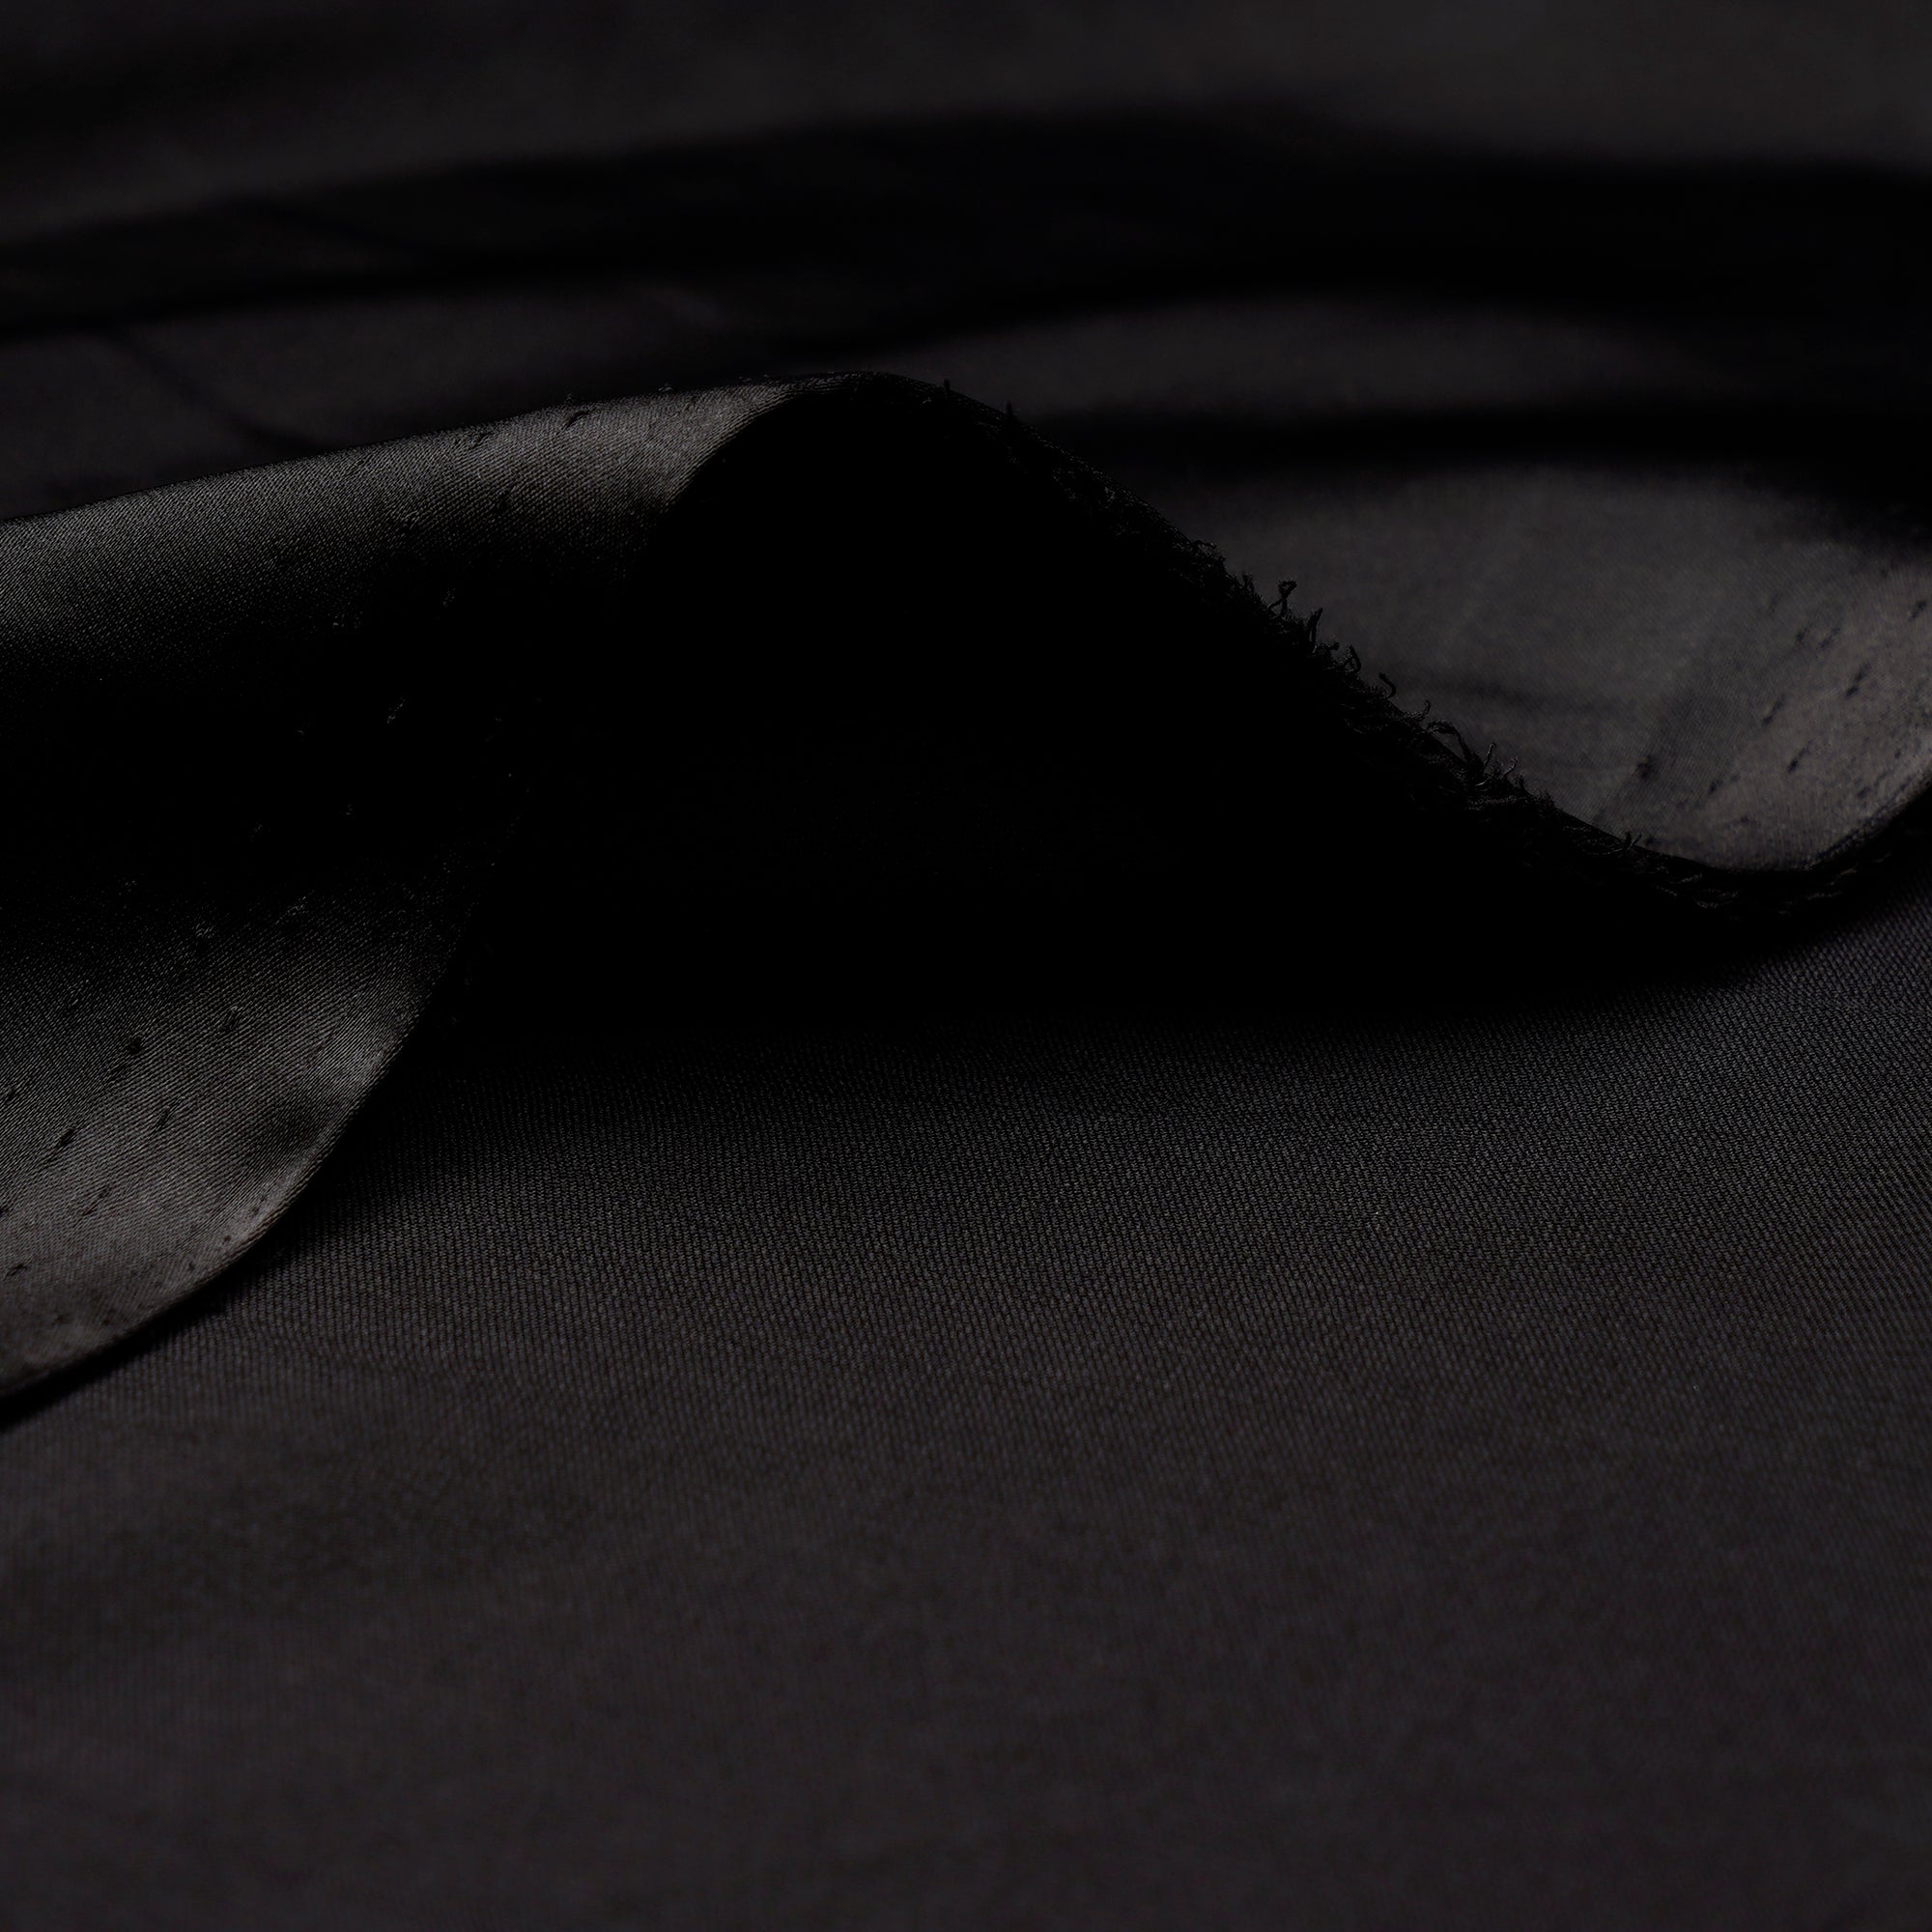 Black Solid Dyed Imported Armani Satin Fabric (60" Width)